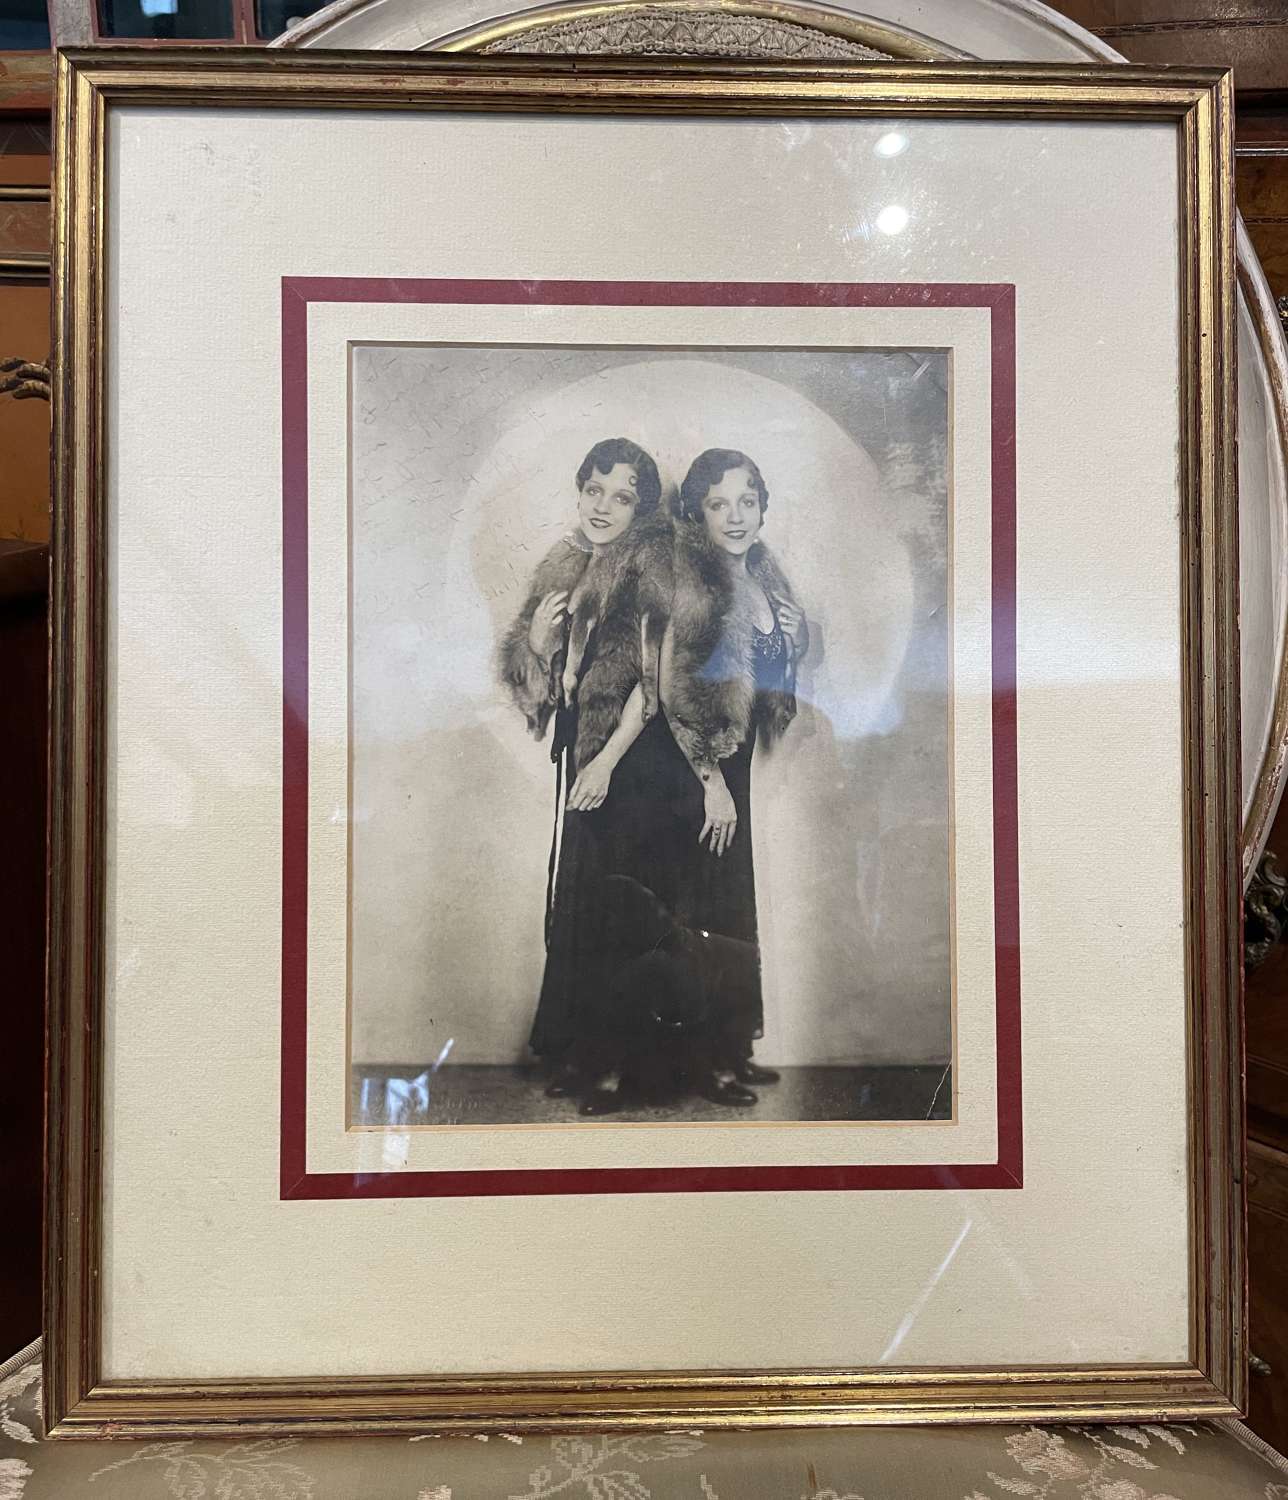 Signed Photograph of Conjoined Twins Daisy & Violet Hilton